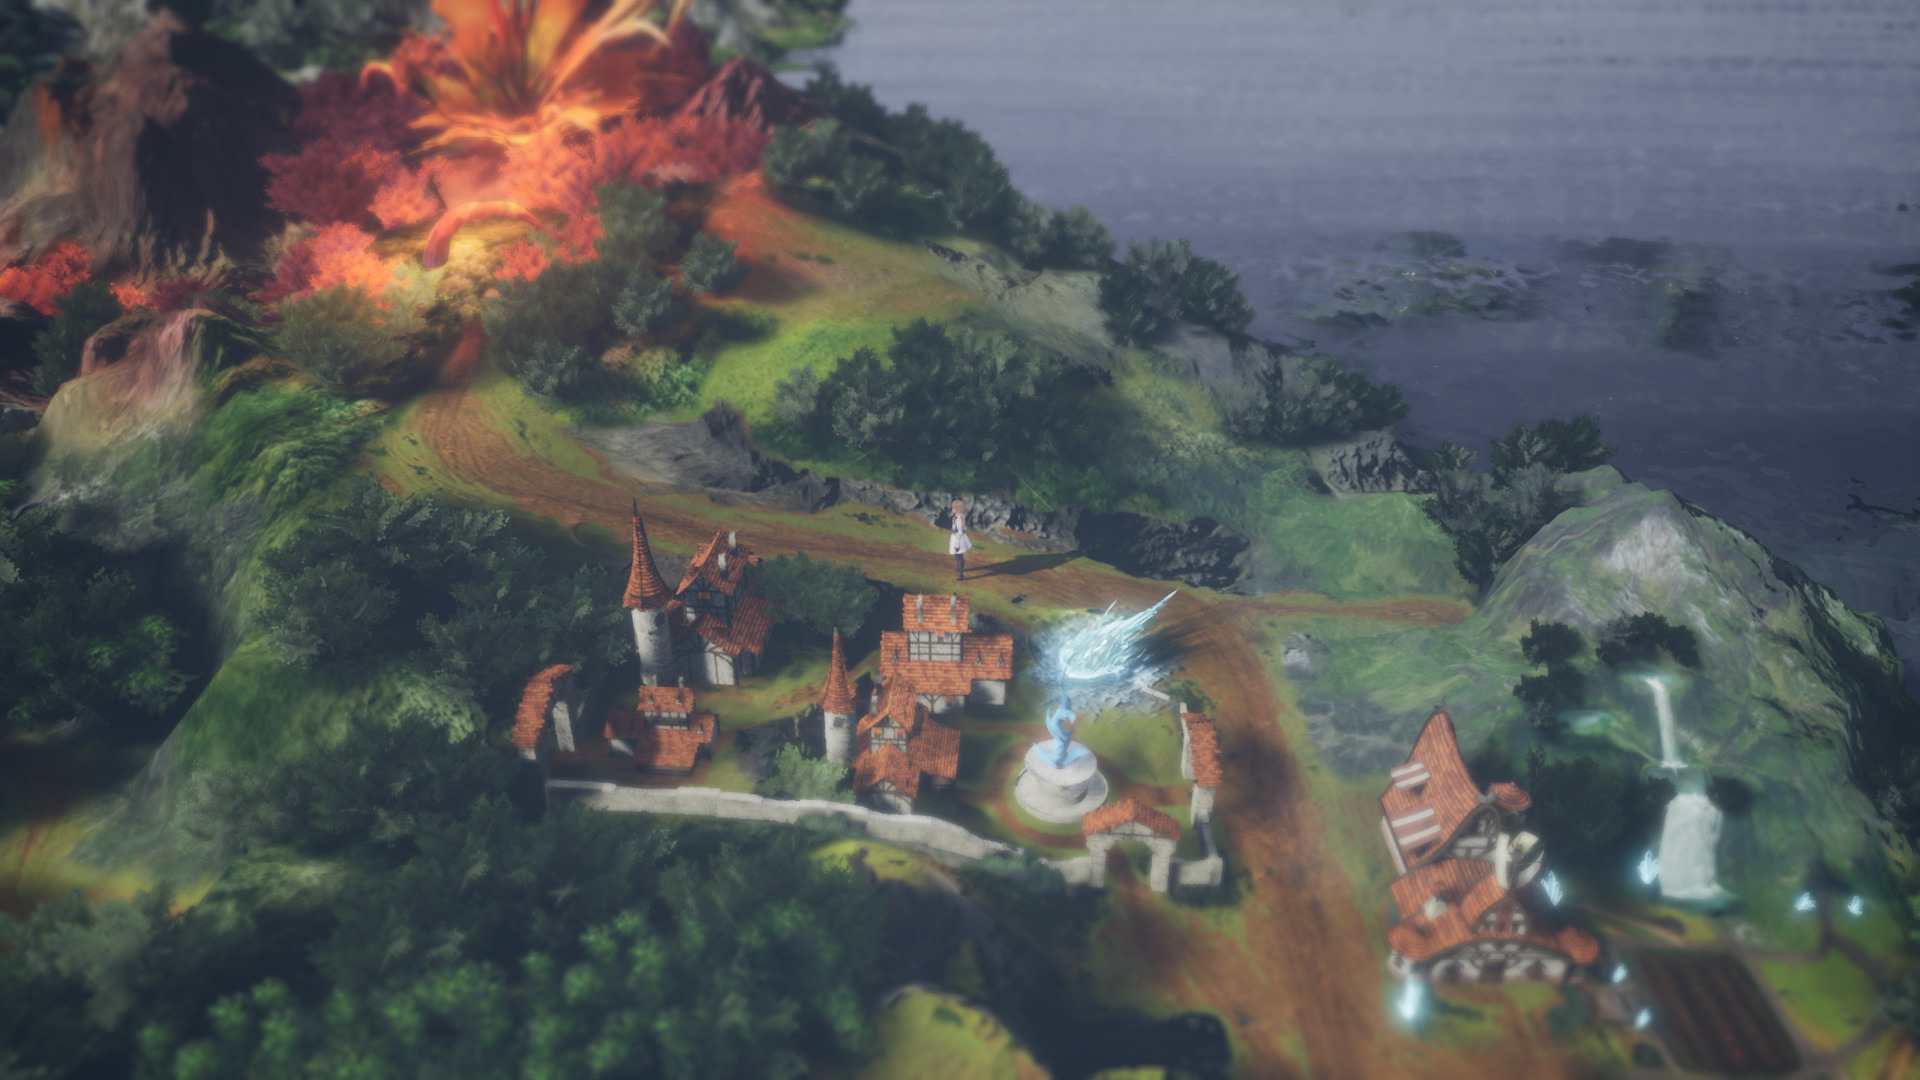 Square Enix reveals new browser RPG: Legend Worlds - The Lifestream